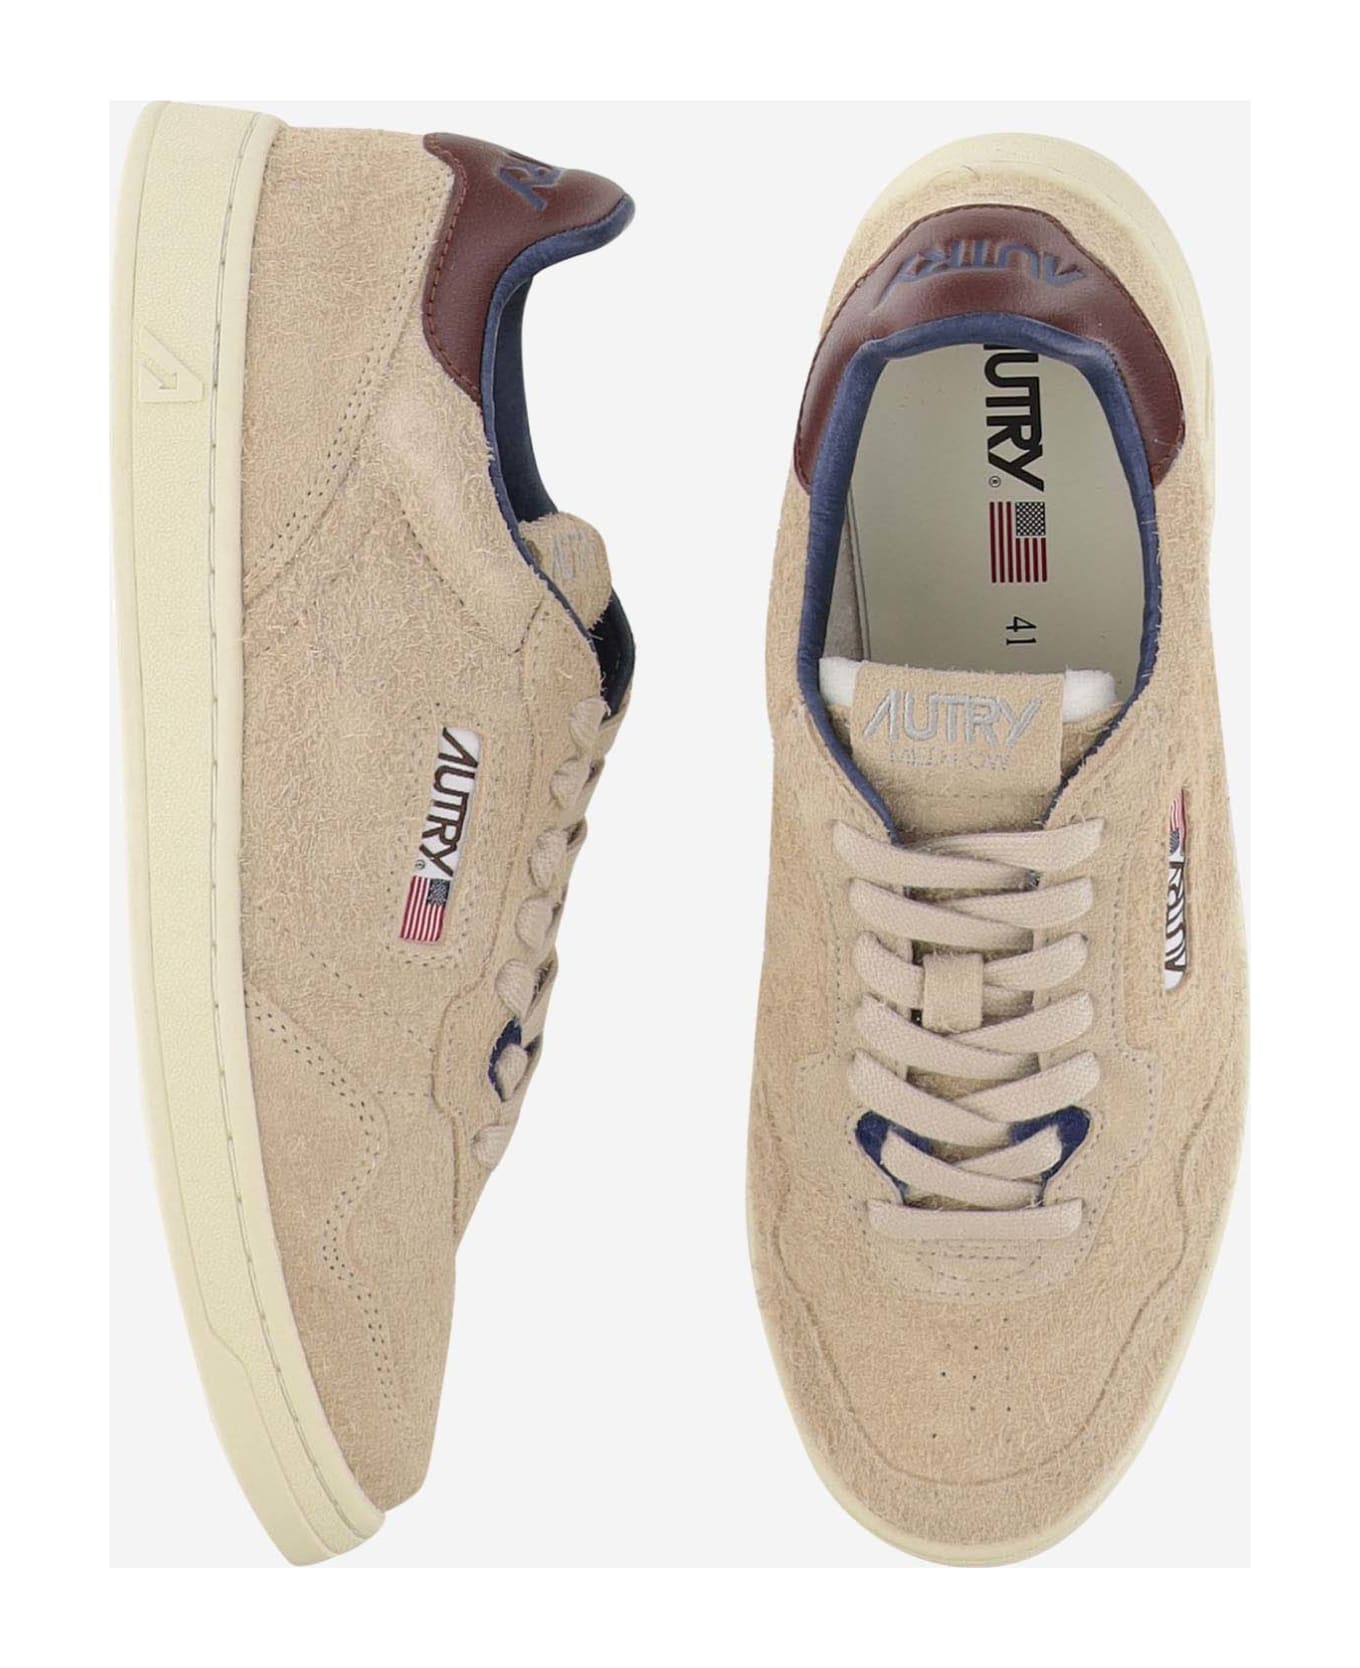 Autry Medalist Low Sneakers In Suede Hair Sand Effect